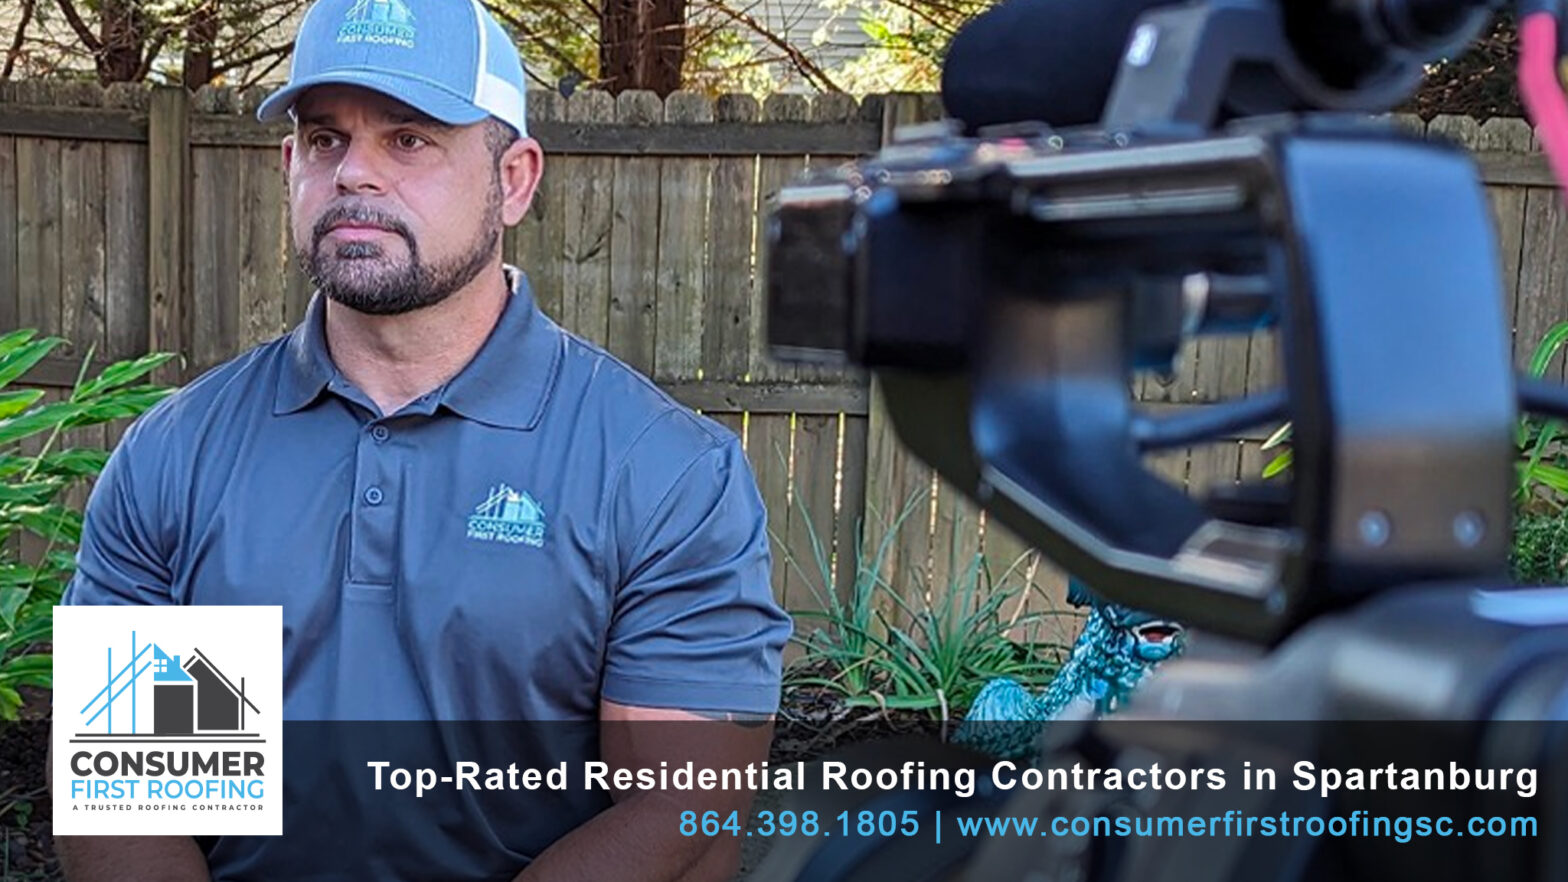 Top-Rated Residential Roofing Contractors in Spartanburg, SC